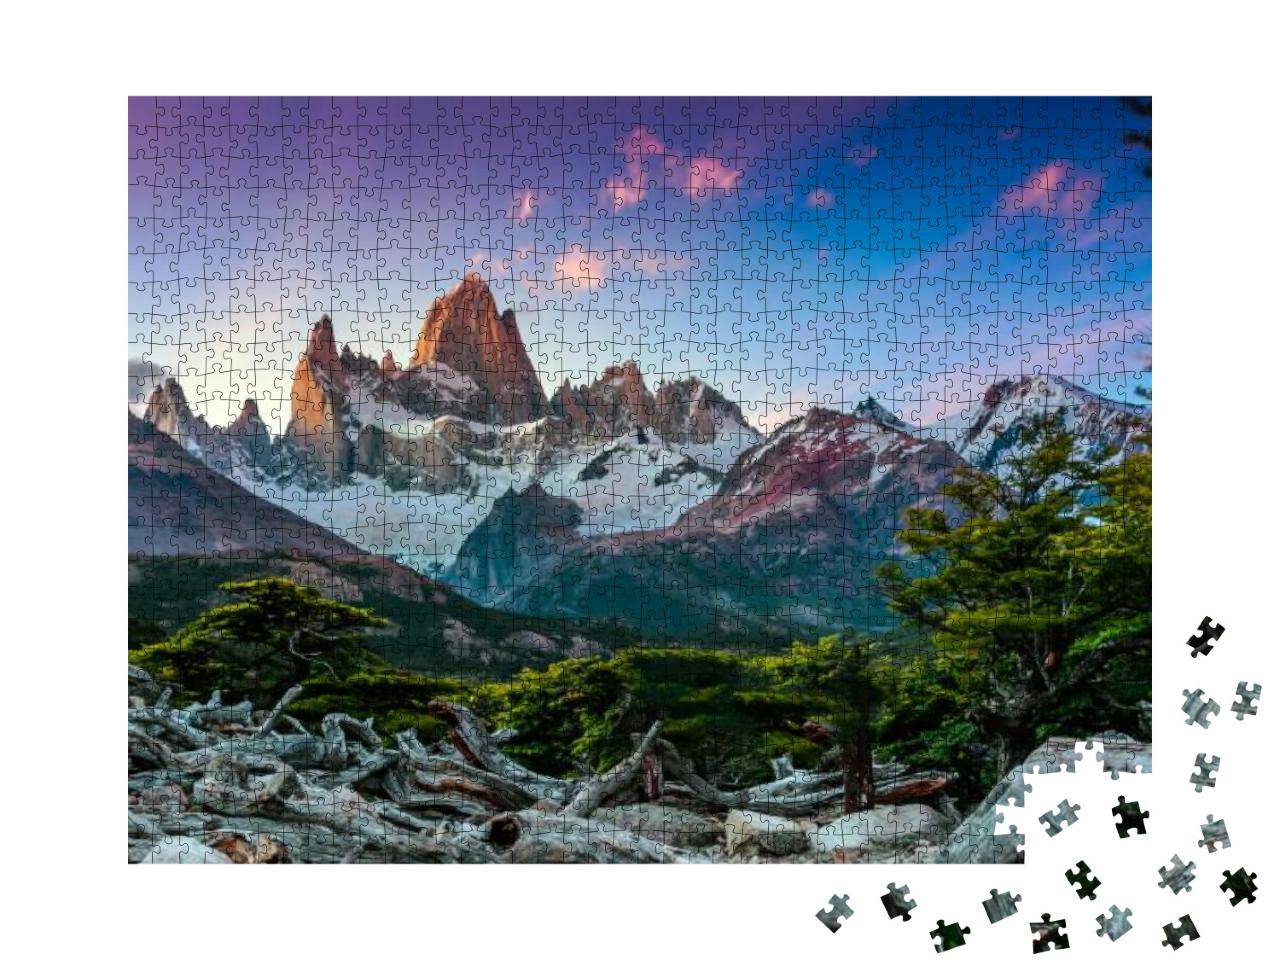 Fitz Roy Mountain Near El Chalten, in the Southern Patago... Jigsaw Puzzle with 1000 pieces